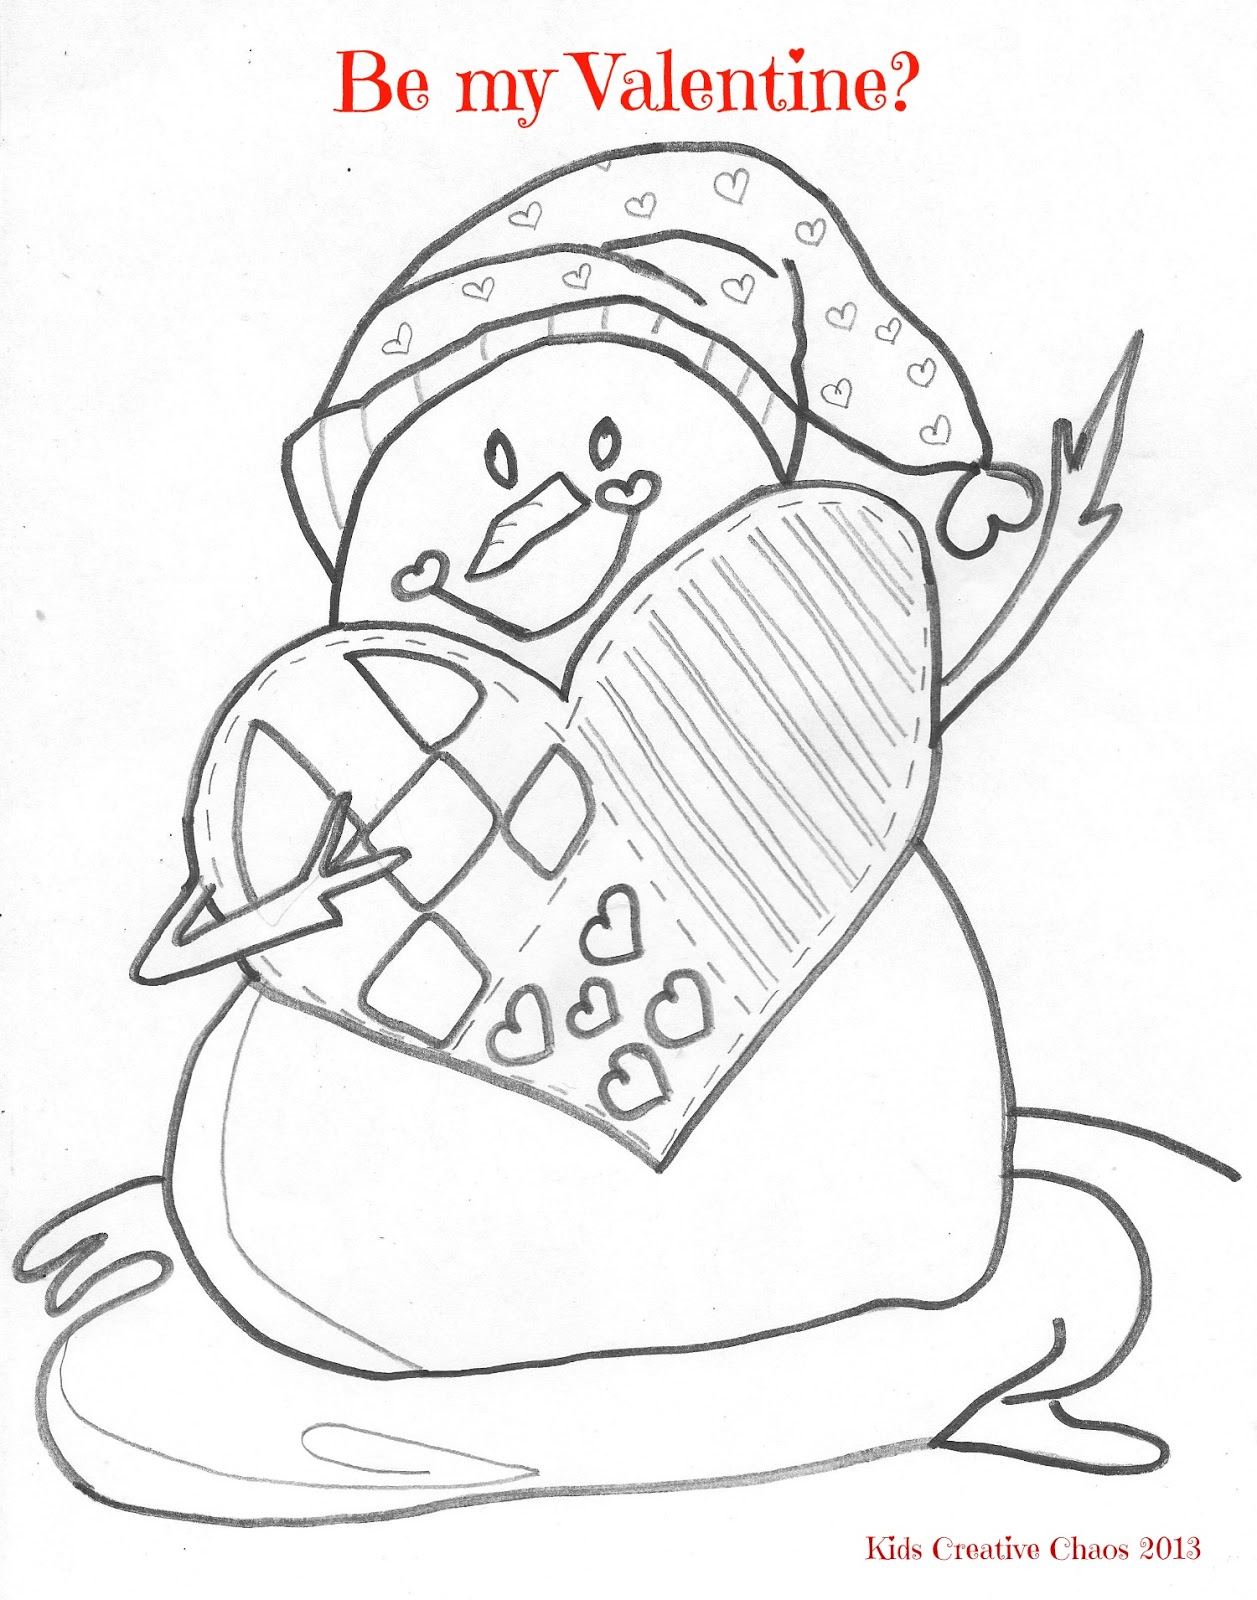 Coloring Pages Of Snowmen Free Valentines Coloring Page Printable Snowman Kids Creative Chaos